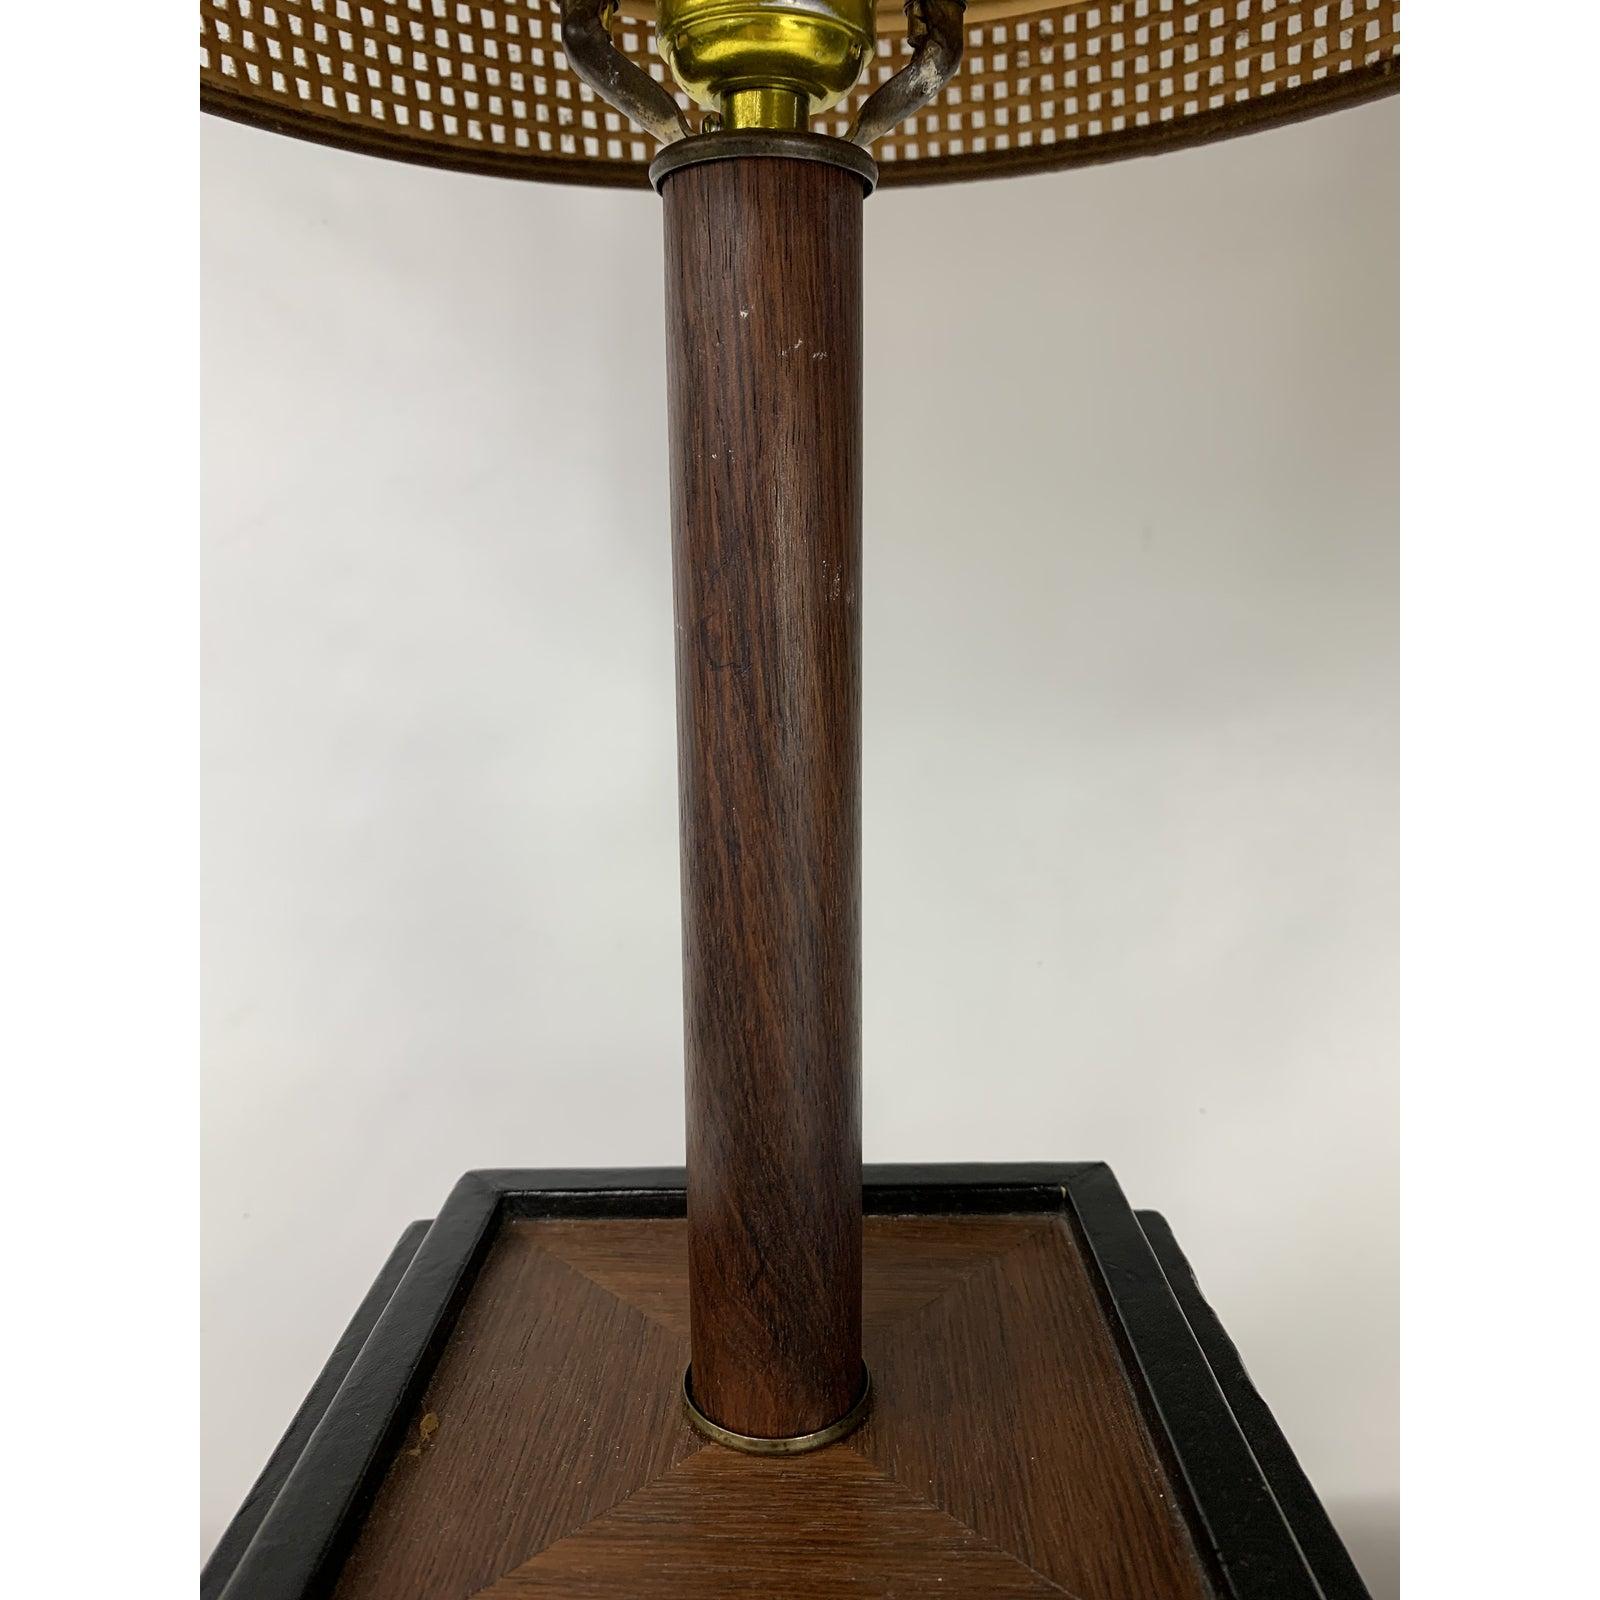 Great solid teak mid century weighted table lamp with wicker and fiberglass shade. Great unique lamp, very nice design.